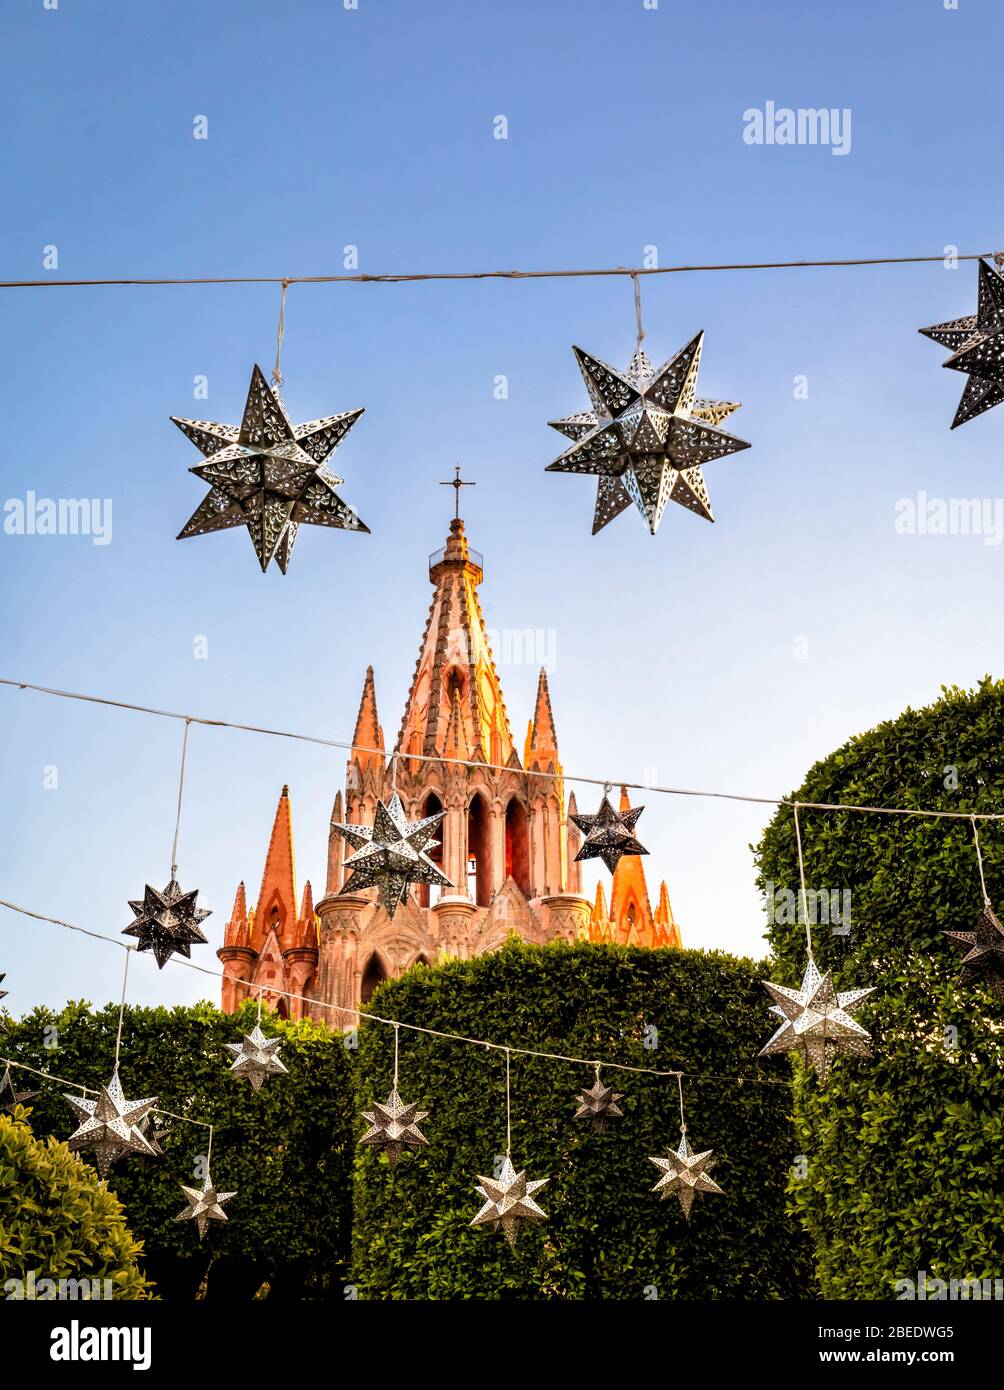 The Parroquia de San Miguel Arcangel in San Miguel de Allende, Mexico, with the metal stars the city is famous for. Stock Photo